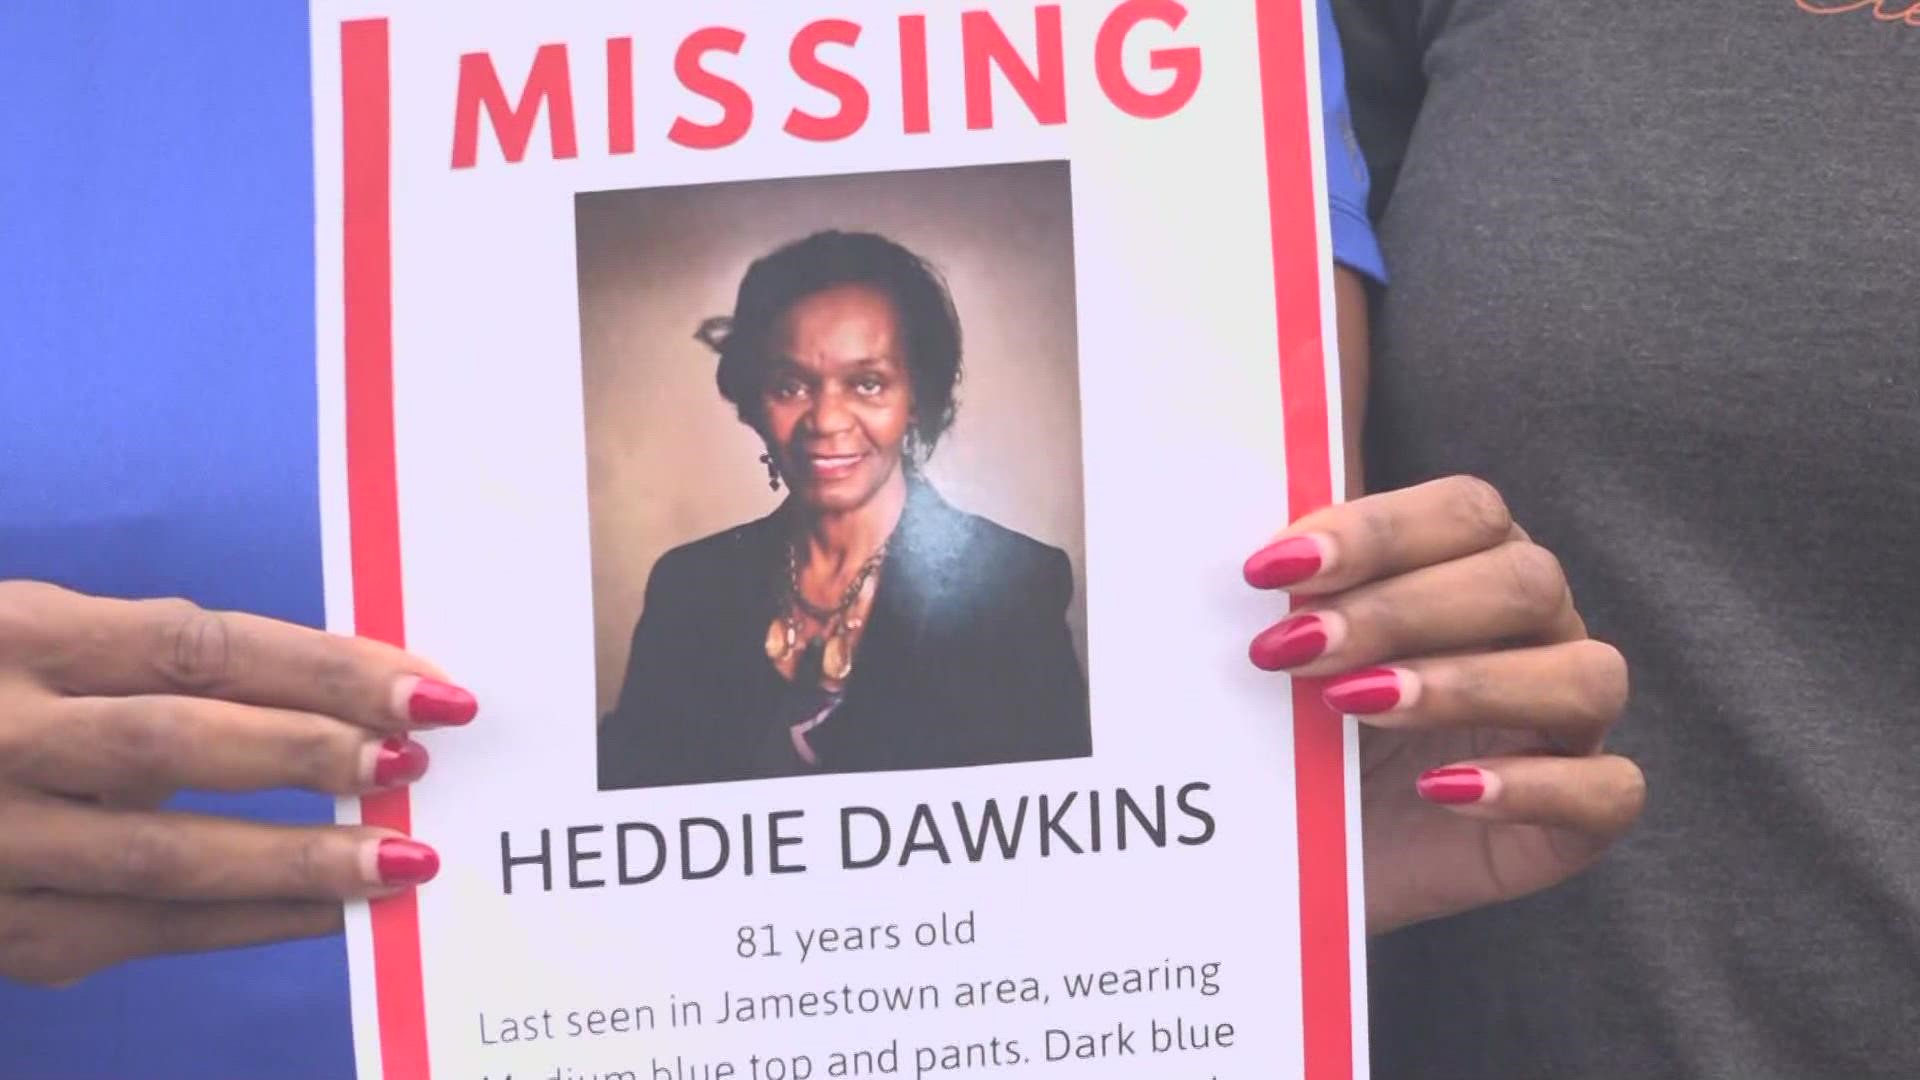 81-year-old Heddie Dawkins left her home early Wednesday morning. Despite a large search, she was still missing more than 48 hours later.